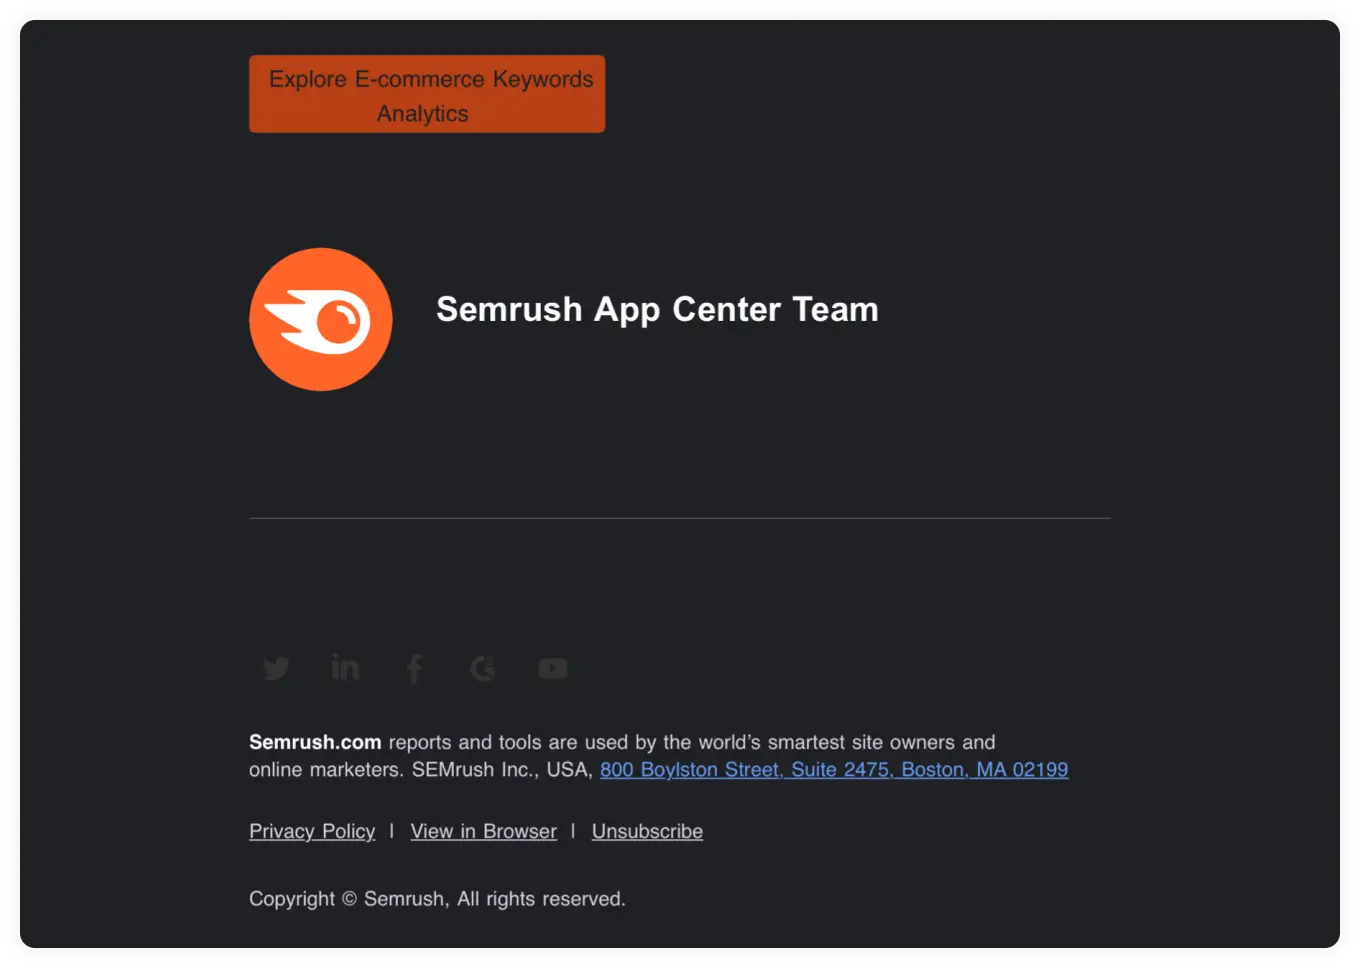 Semrush's email footer